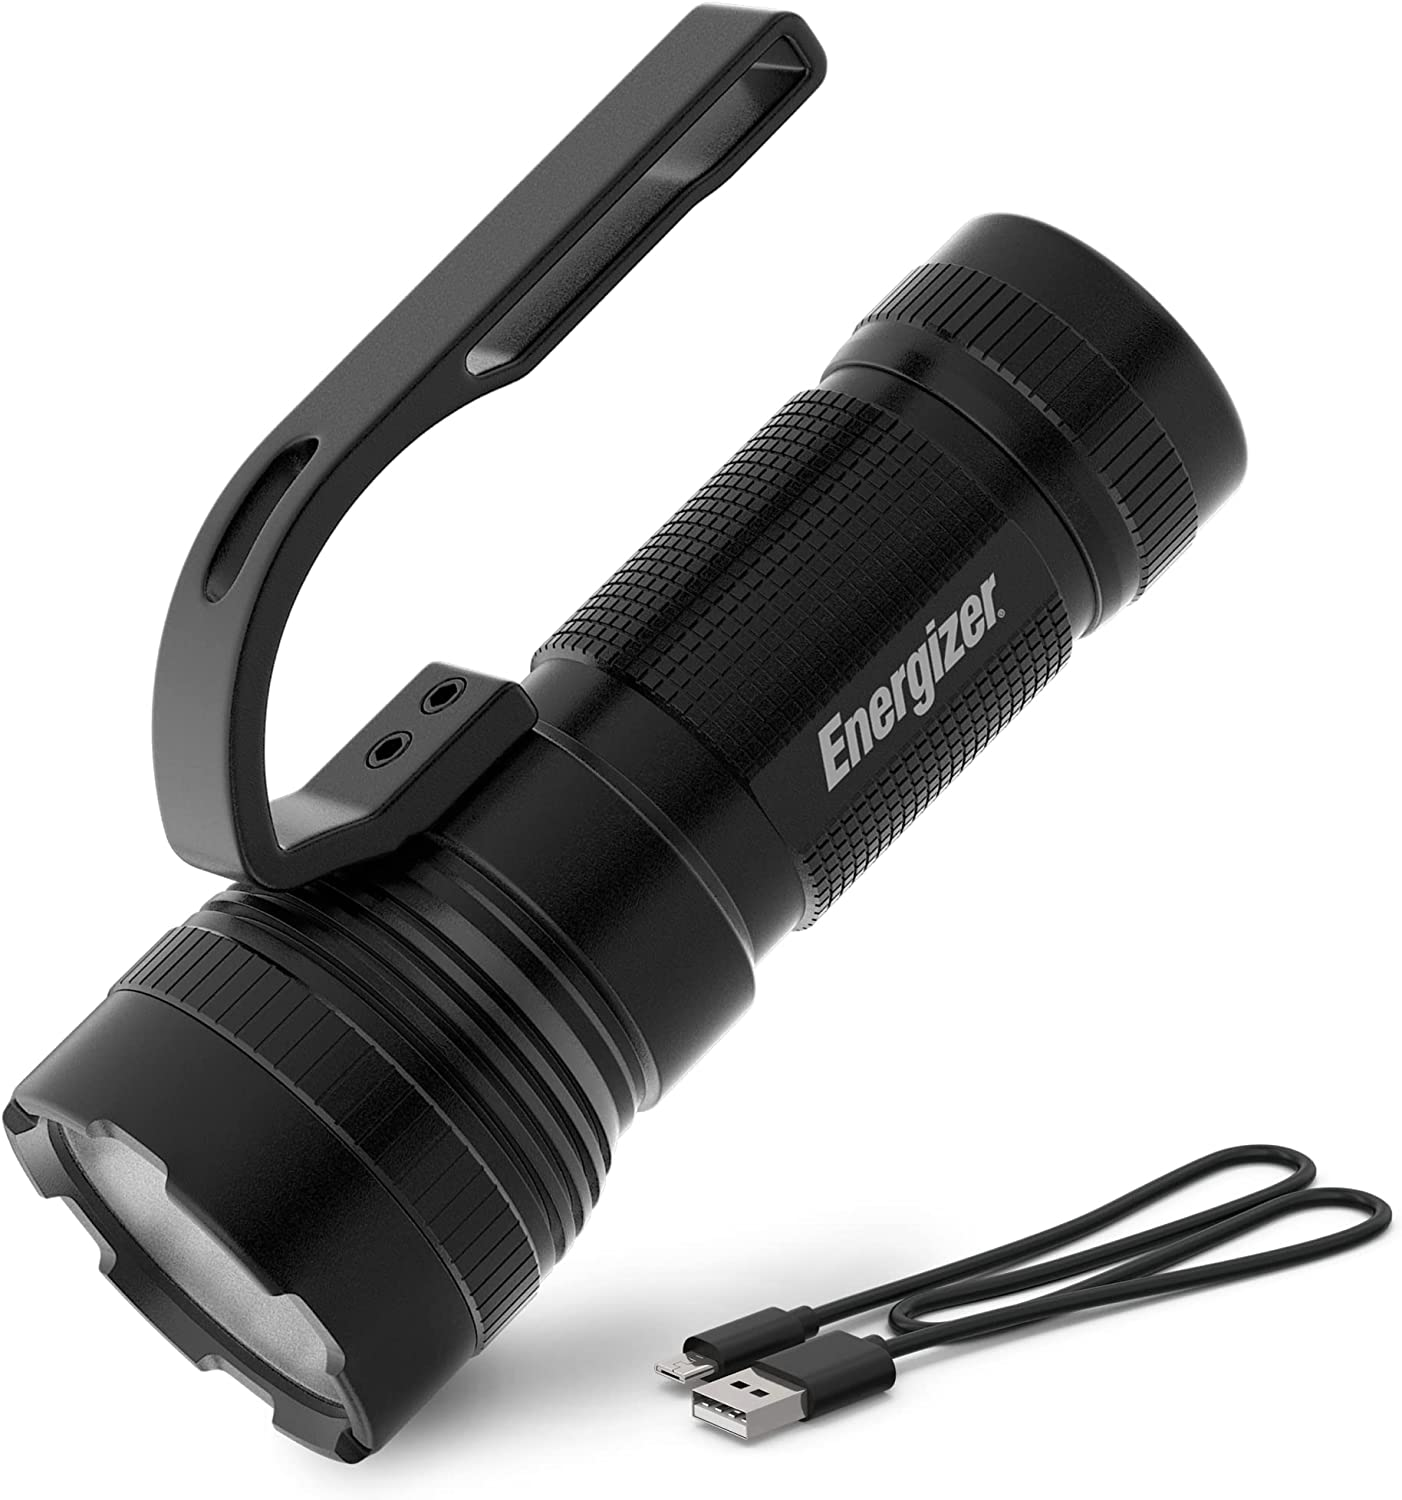 ENERGIZER Rechargeable LED Flashlight S1000 50% off - $4.77